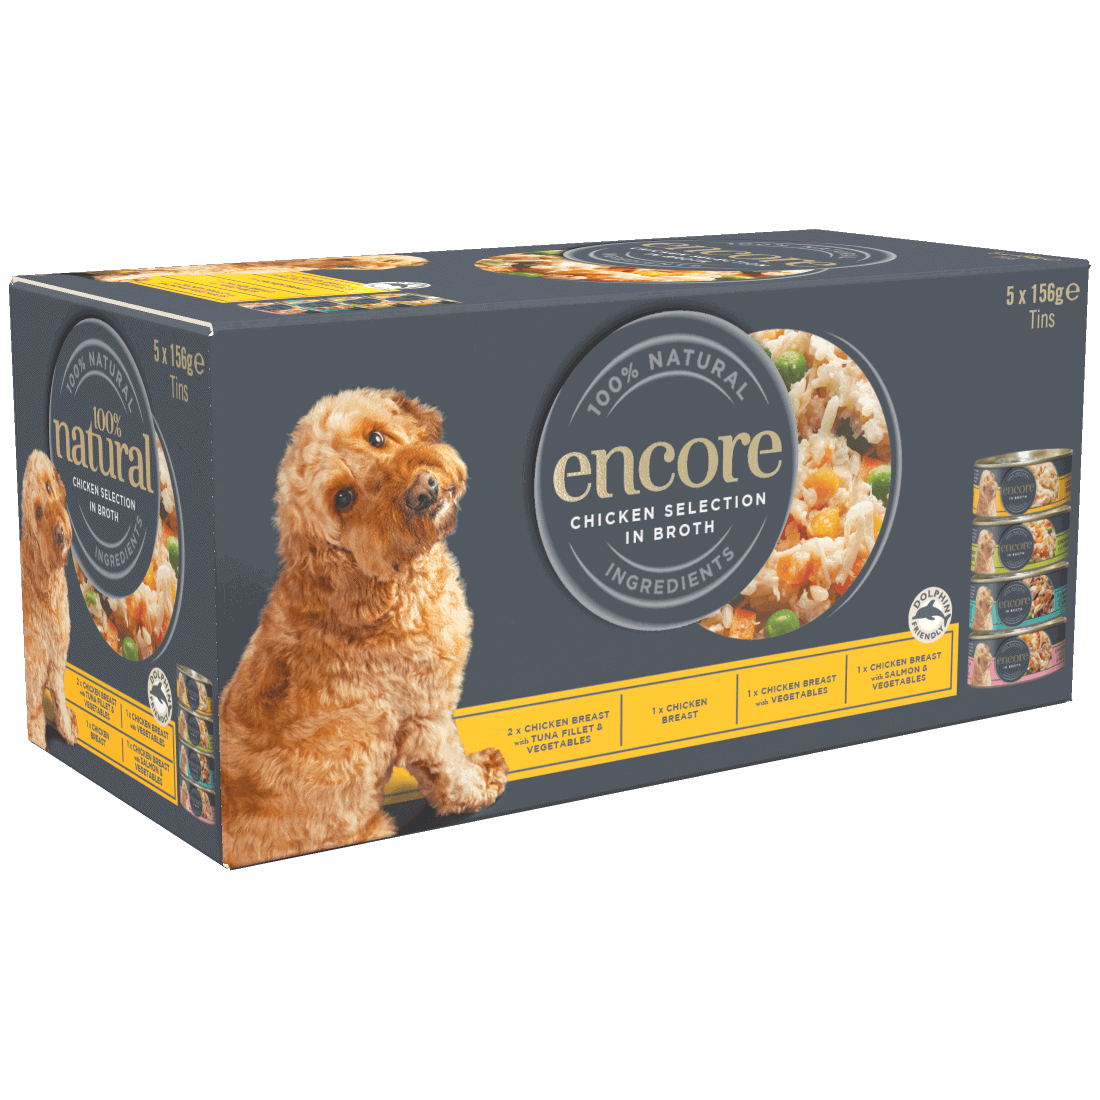 Box of 5 Encore finest selection chicken in broth dog food in tins